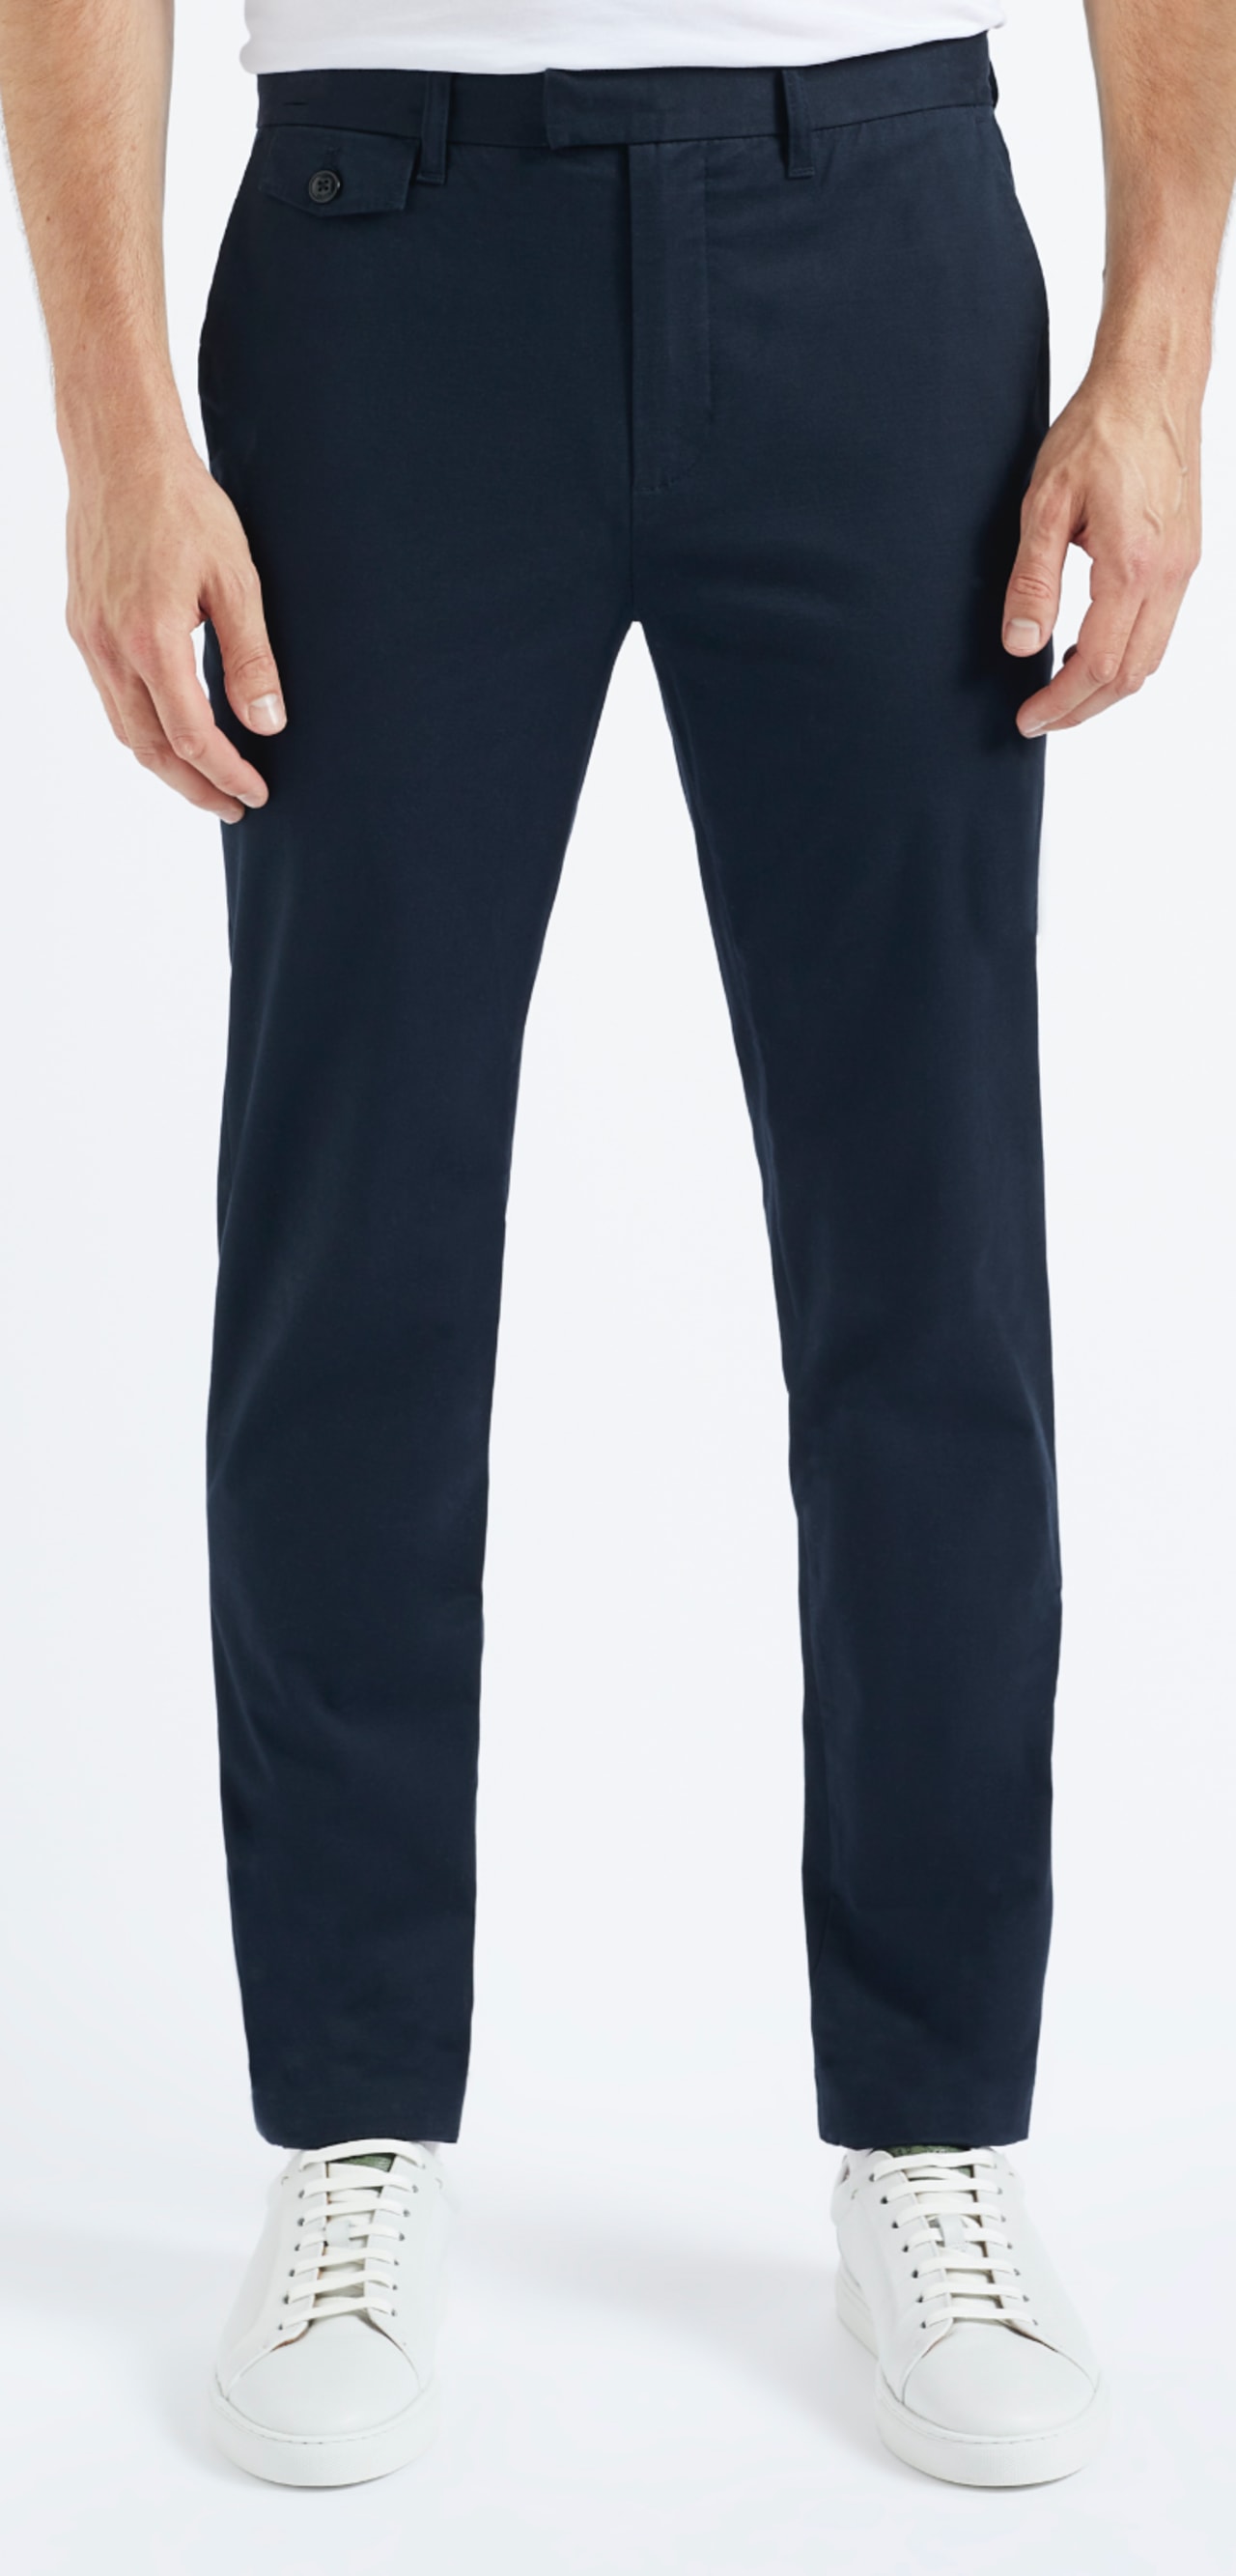 Franklin fit trousers